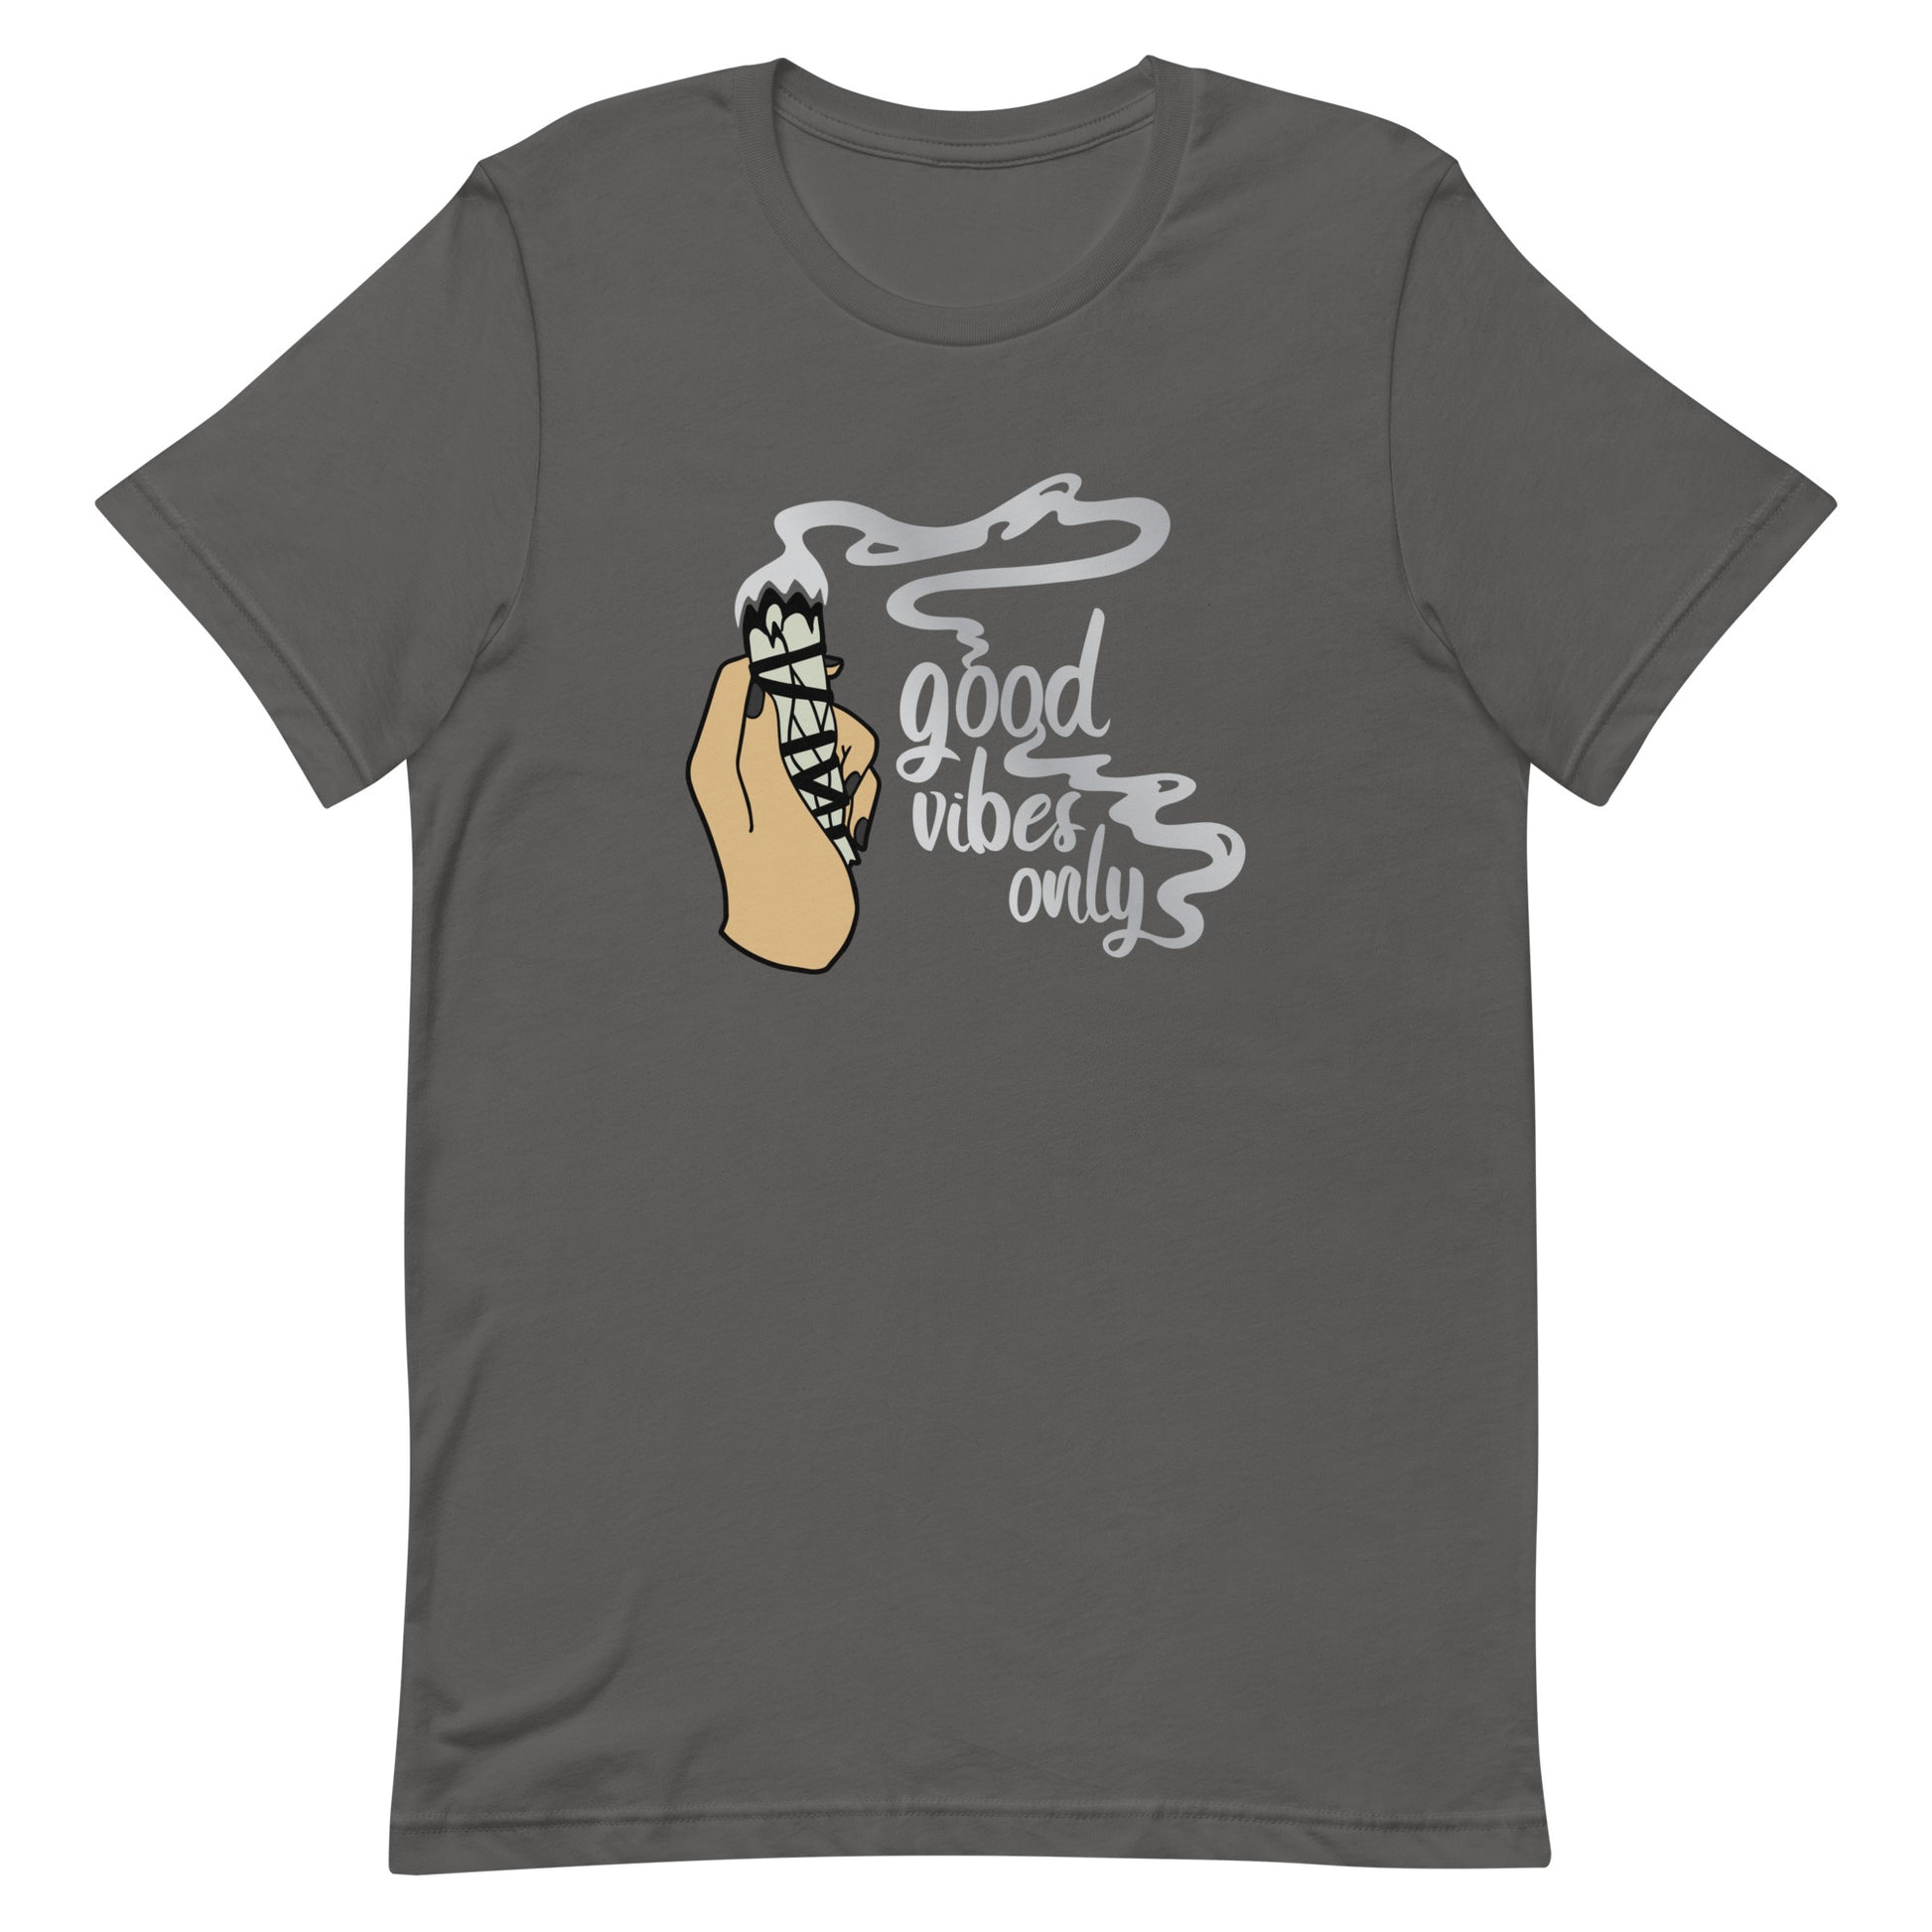 A grey crewneck t-shirt featuring an illustration of a hand holding a sage smudge stick. Smoke is flowing from the tip of the sage and forms text reading "good vibes only"